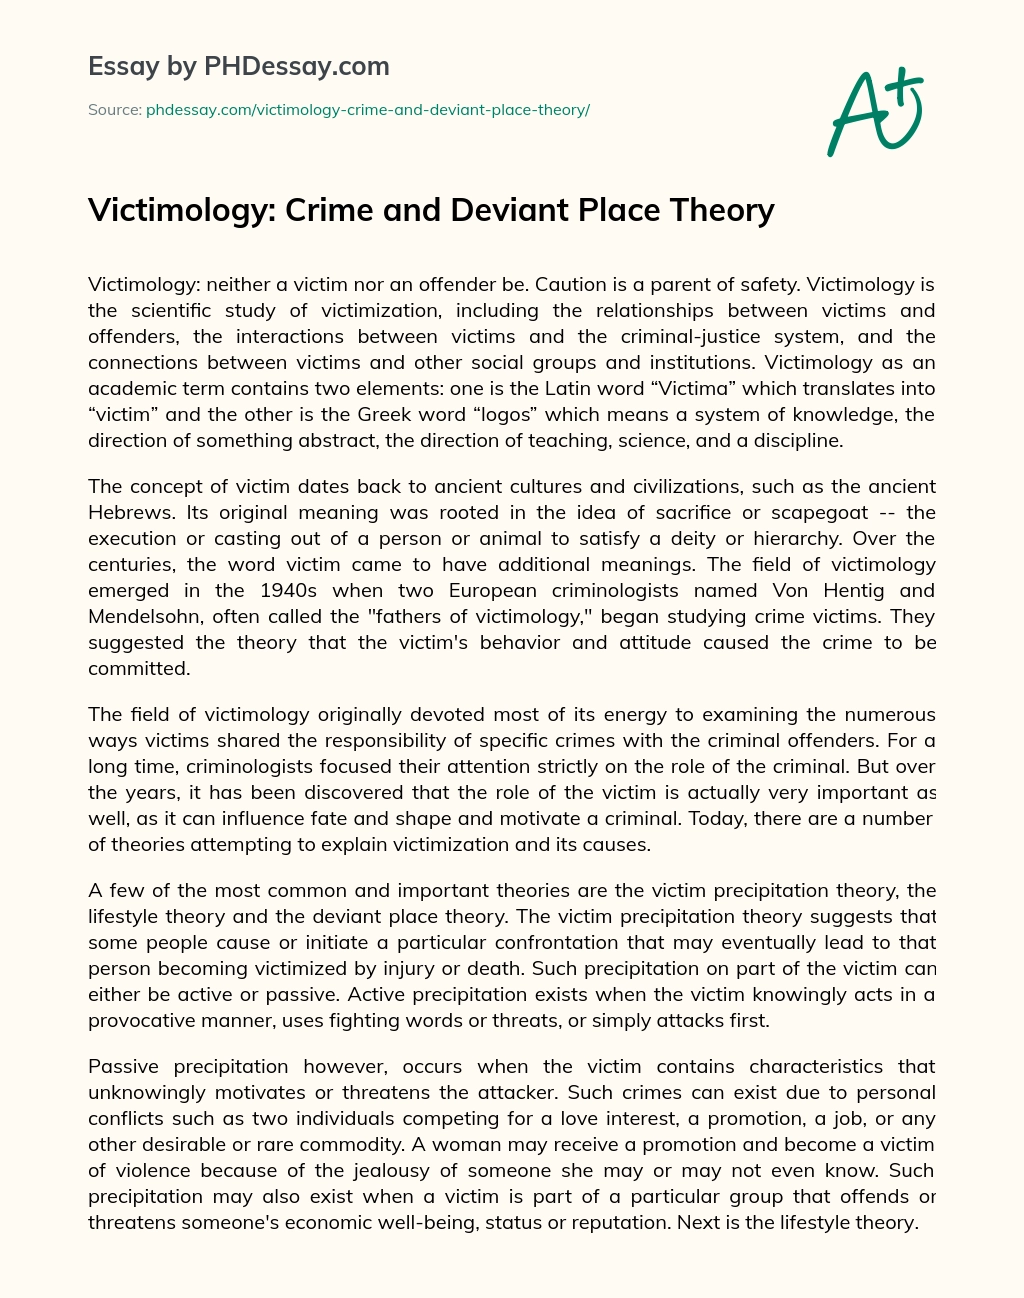 Victimology: Crime and Deviant Place Theory essay